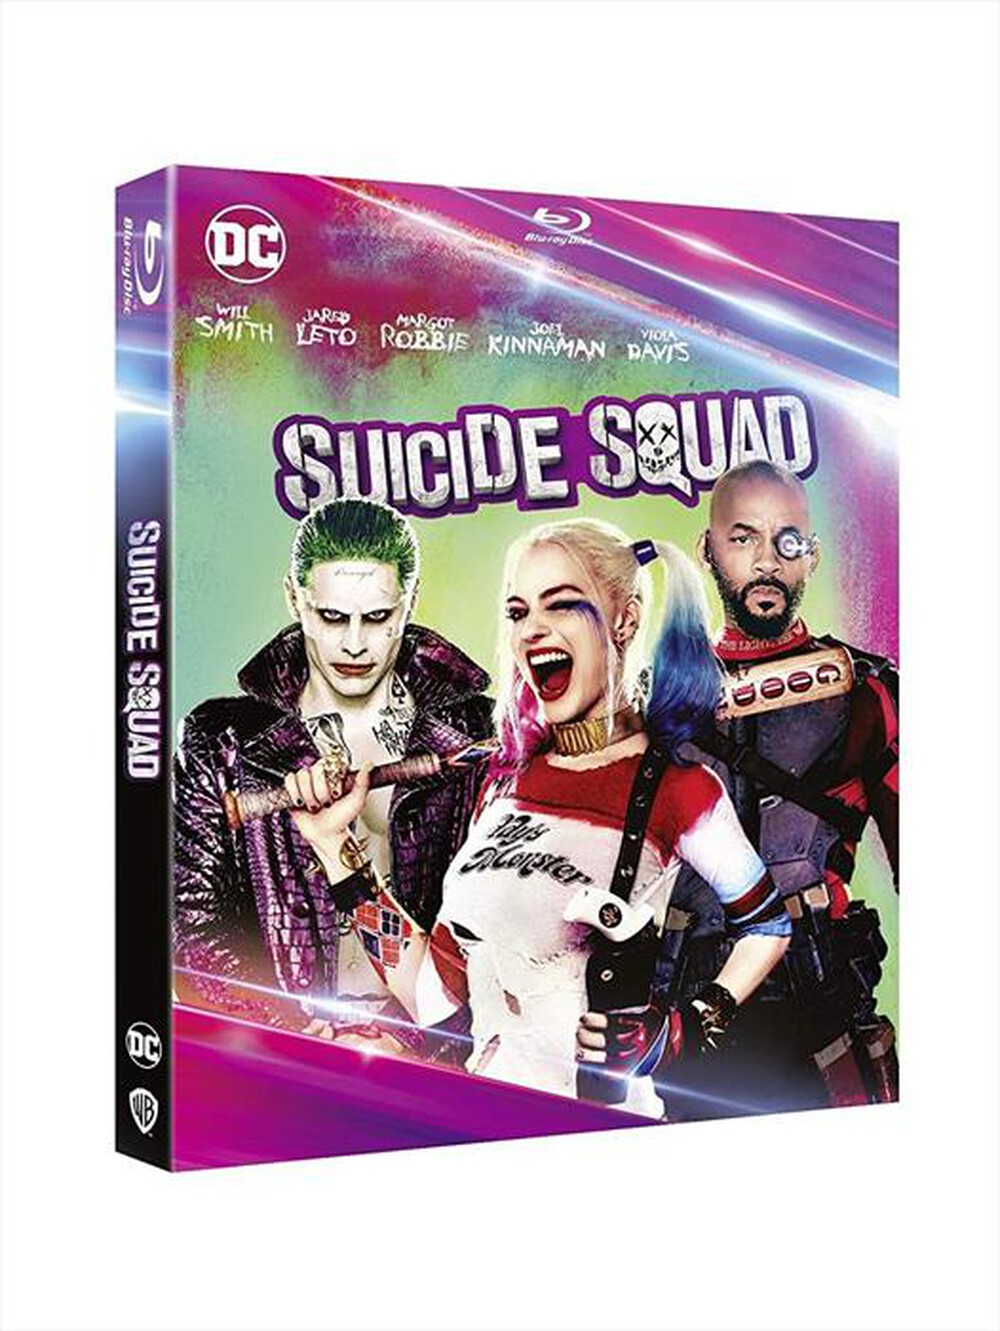 "WARNER HOME VIDEO - Suicide Squad (Dc Comics Collection)"